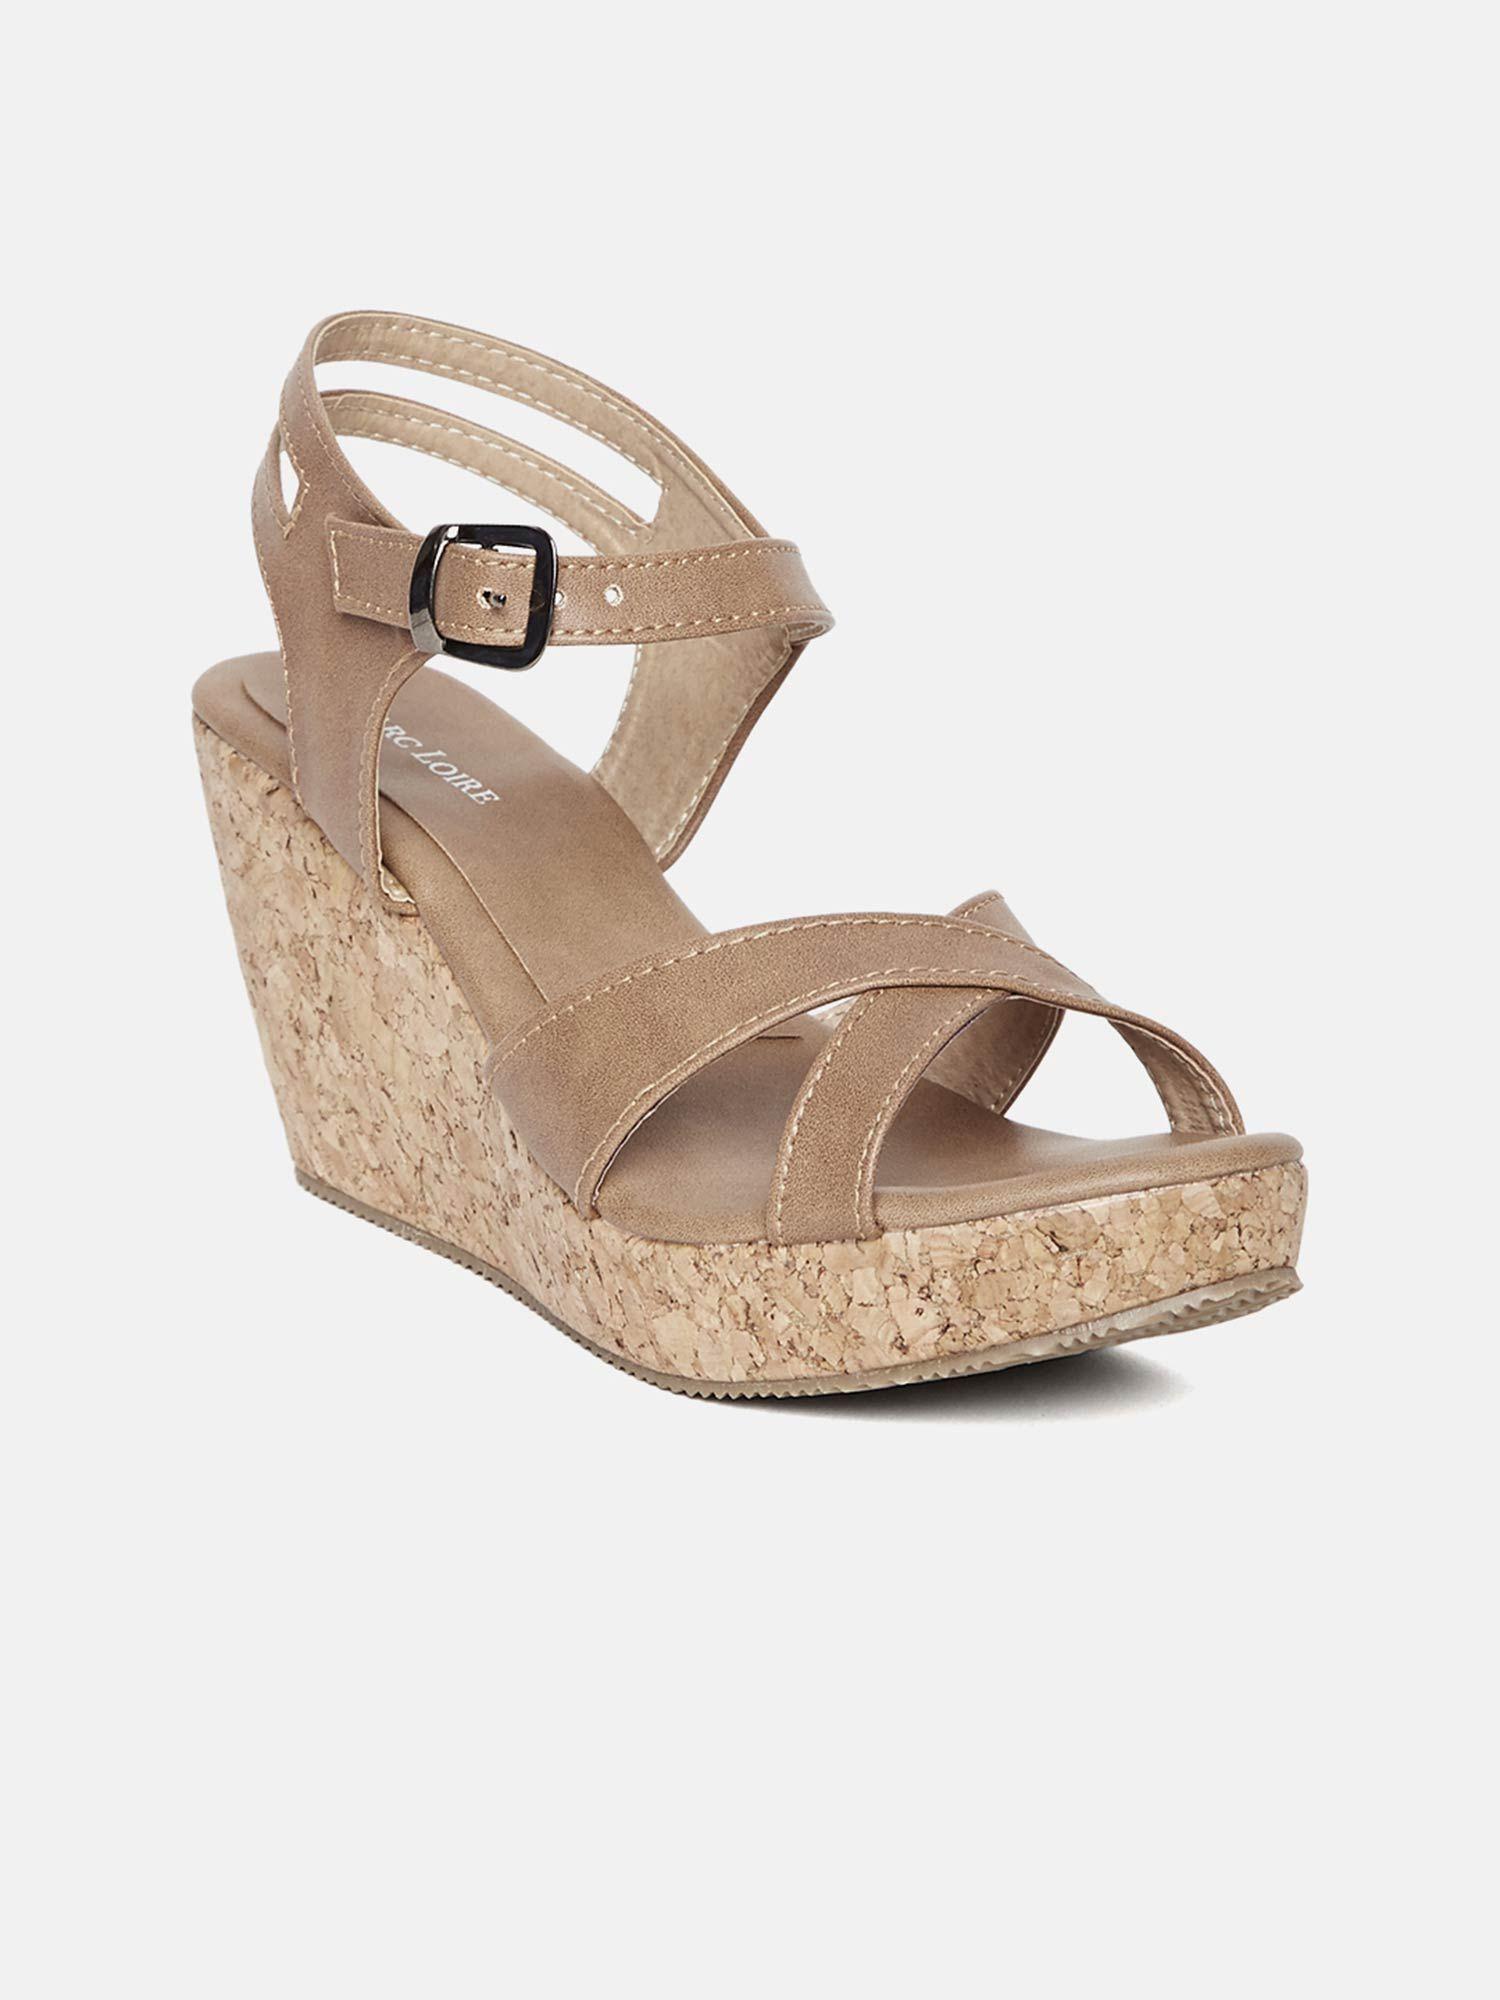 solid tan wedges